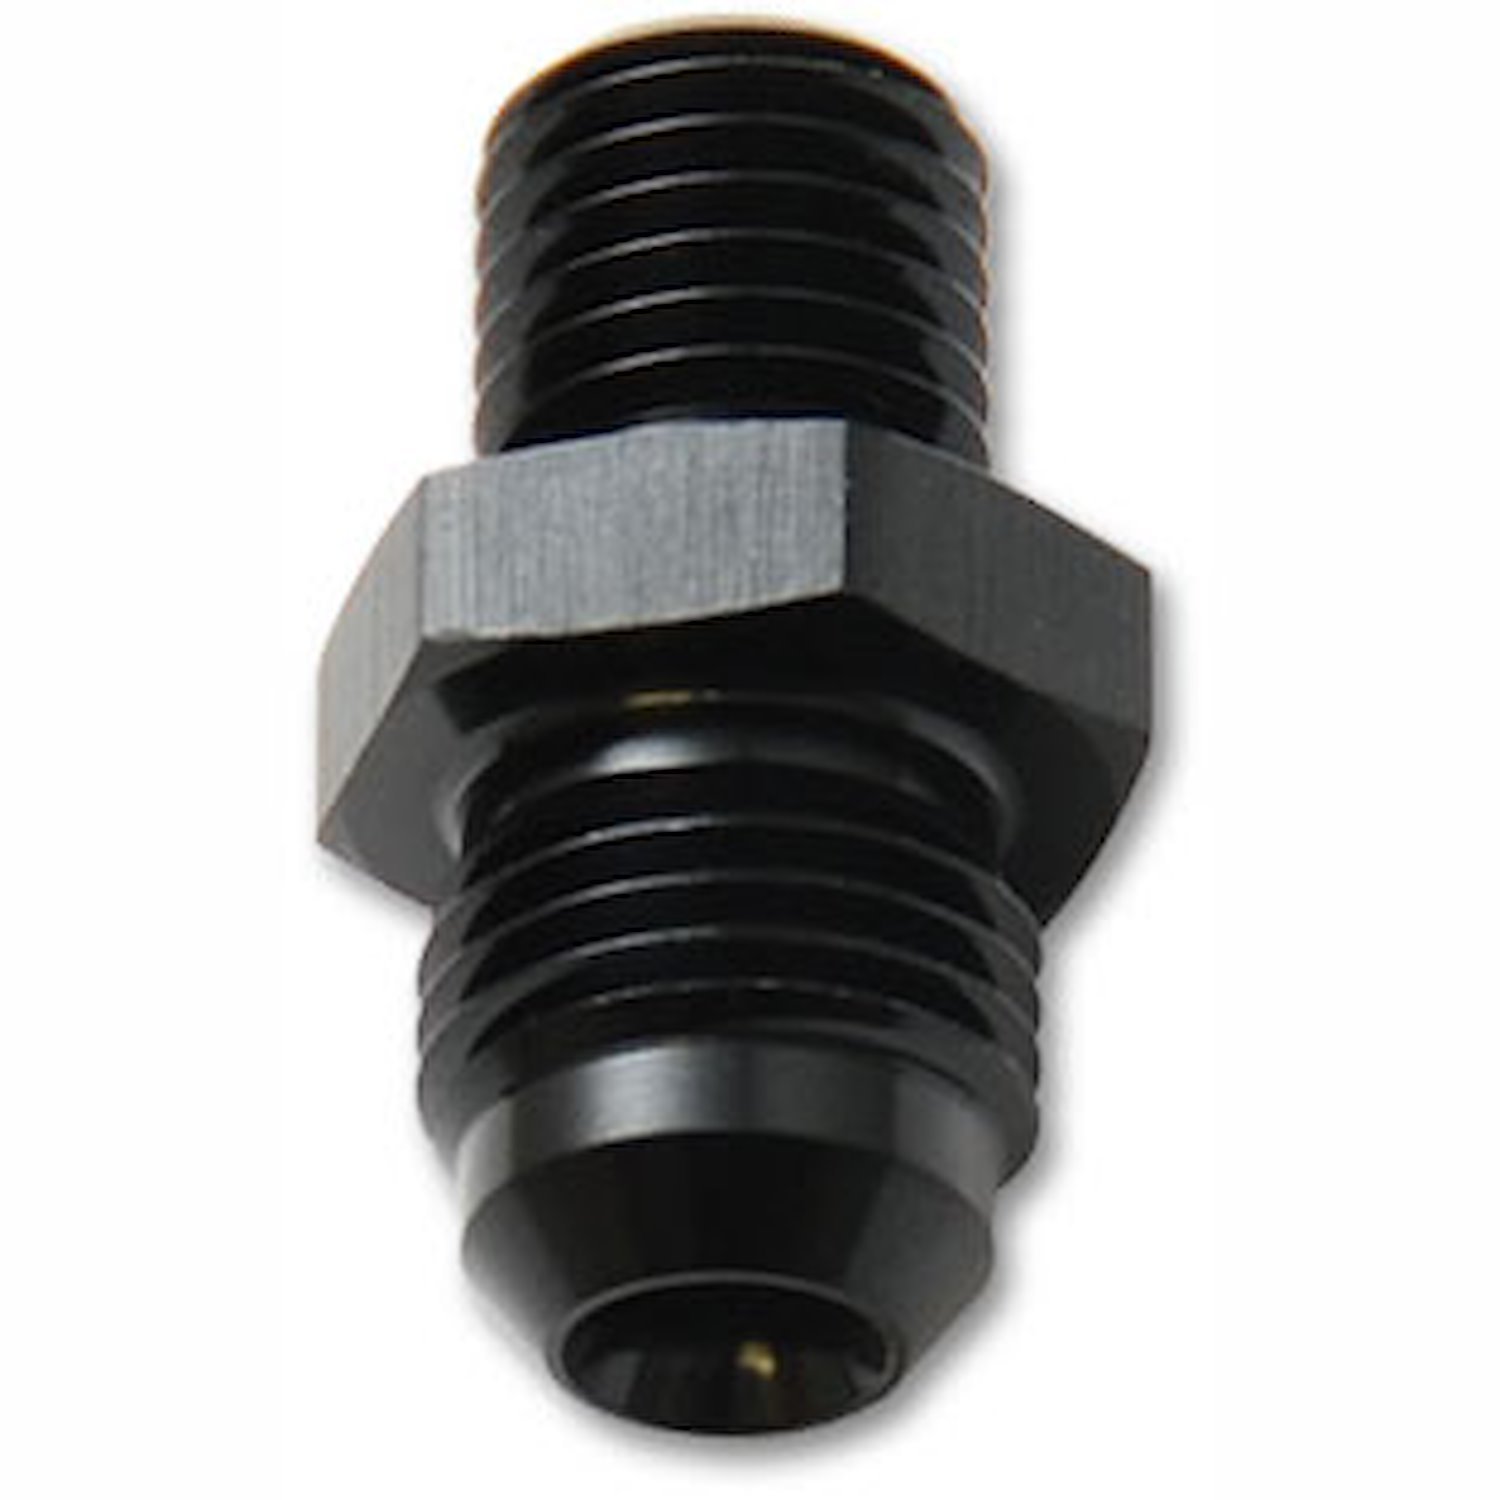 AN to Metric Adapter Fitting [-6 to 20mm x 1.50]